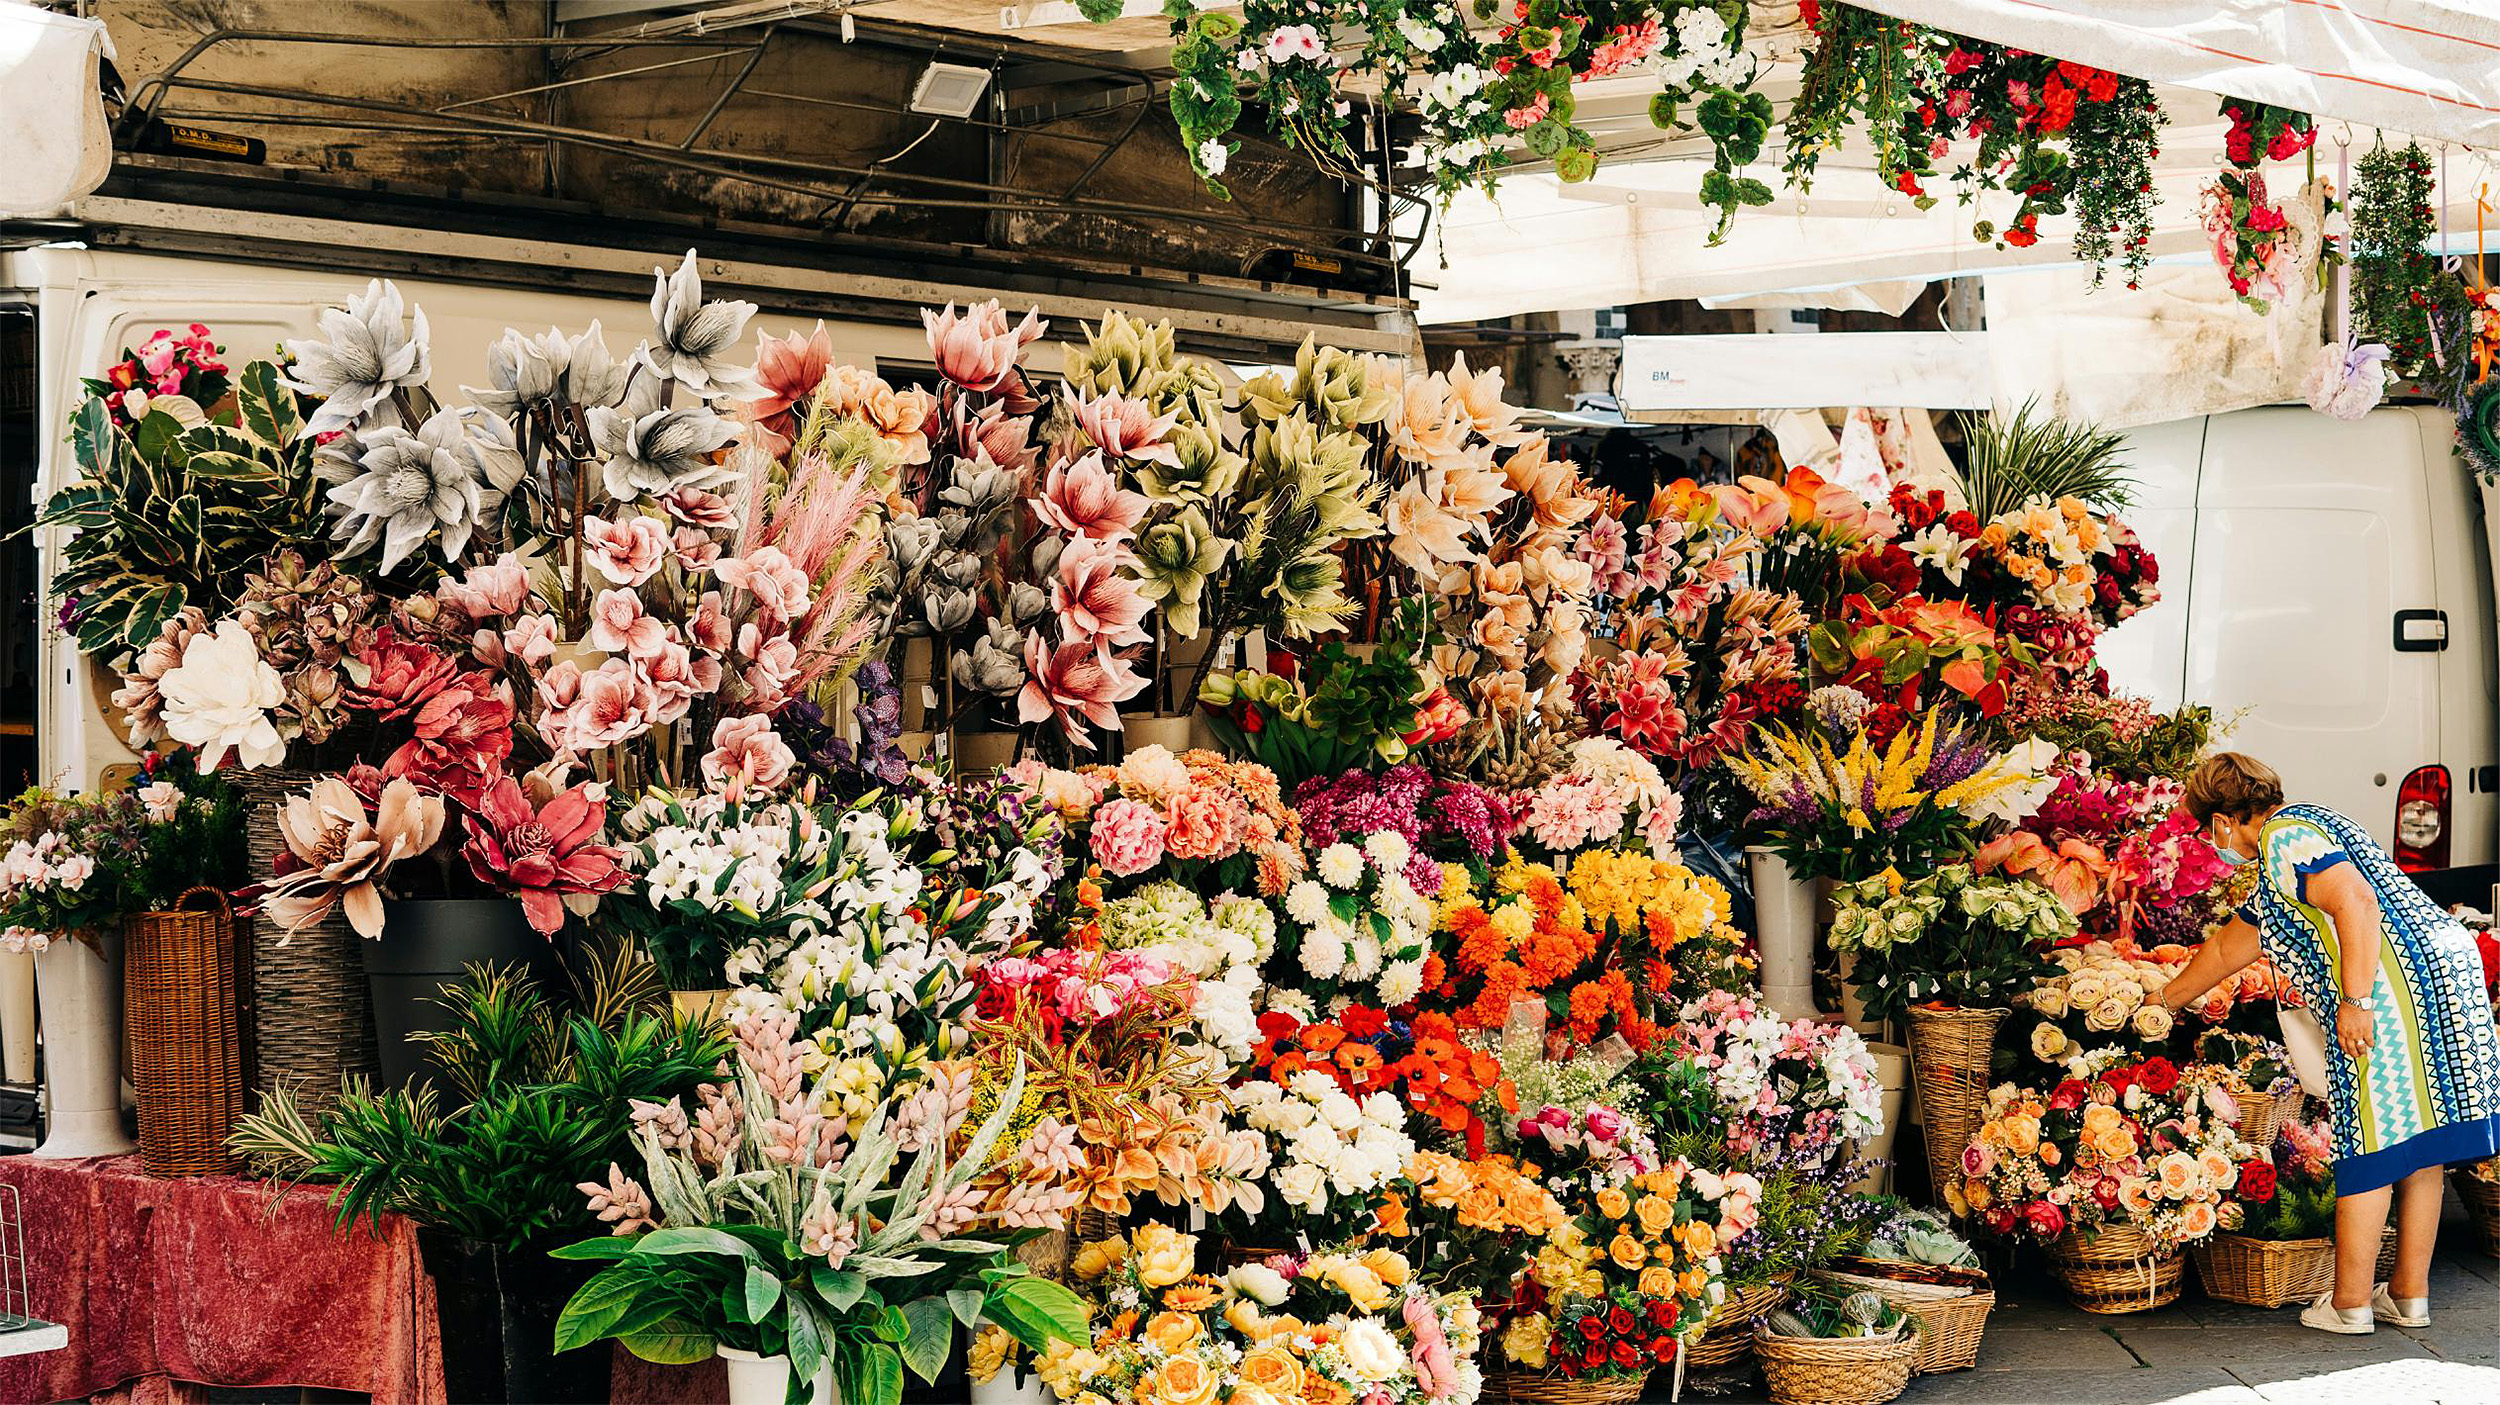 A Spring Farmers' Market in the Mediterranean. A woman selects roses from an abundant flower stand. 